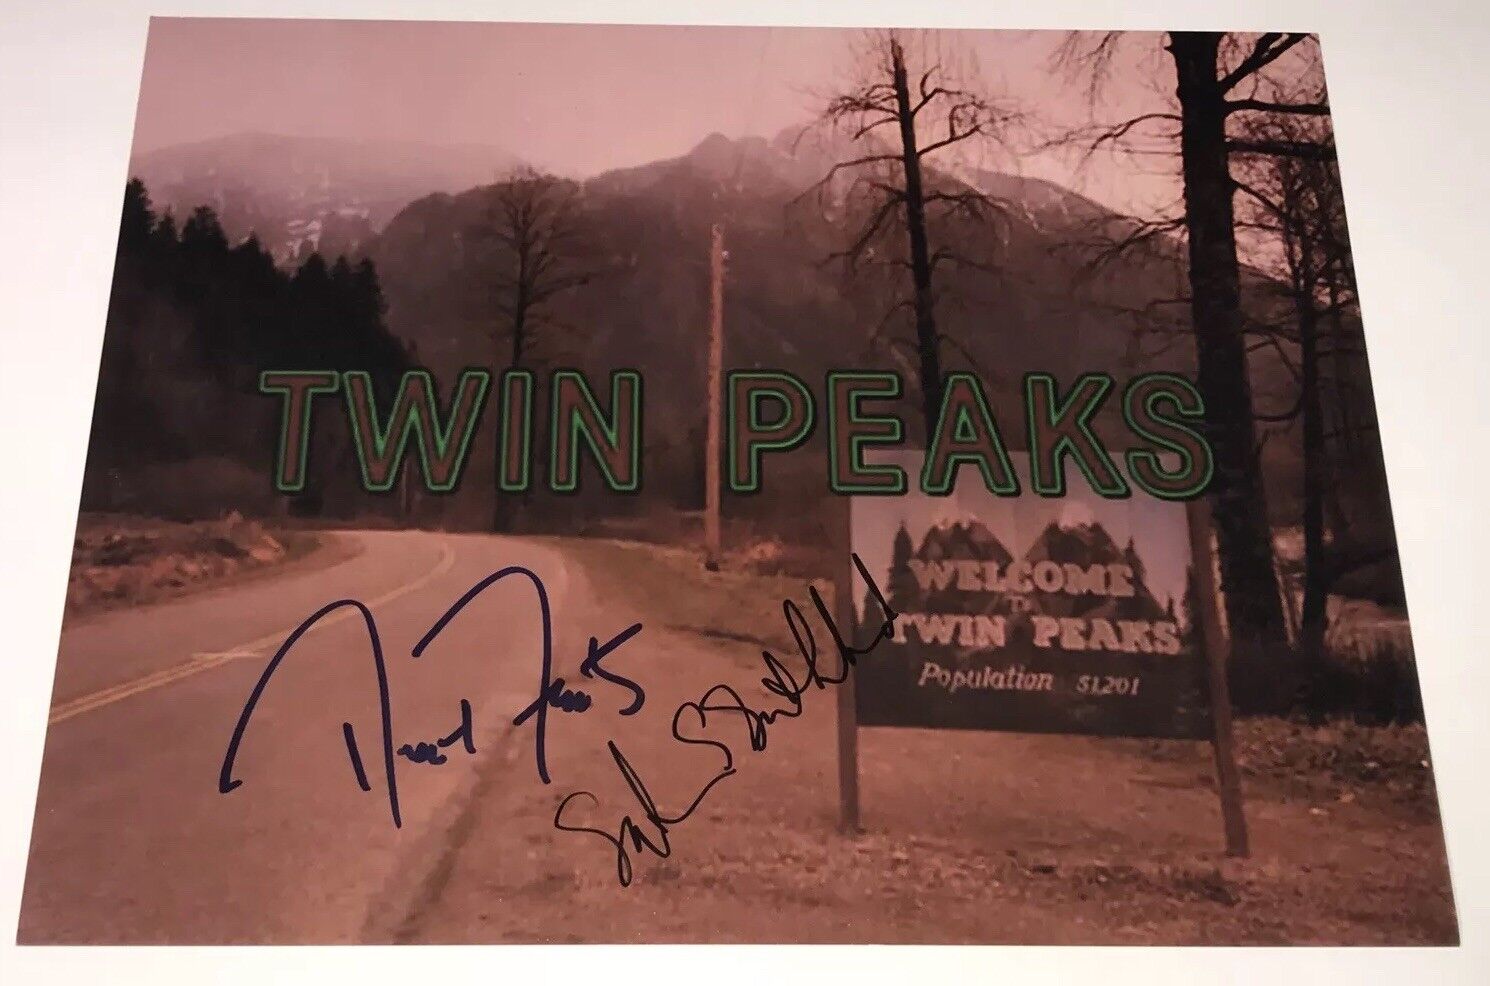 Robert Forster TWIN PEAKS Cast X2 Signed 11x14 Photo Poster painting In Person Autograph PROOF